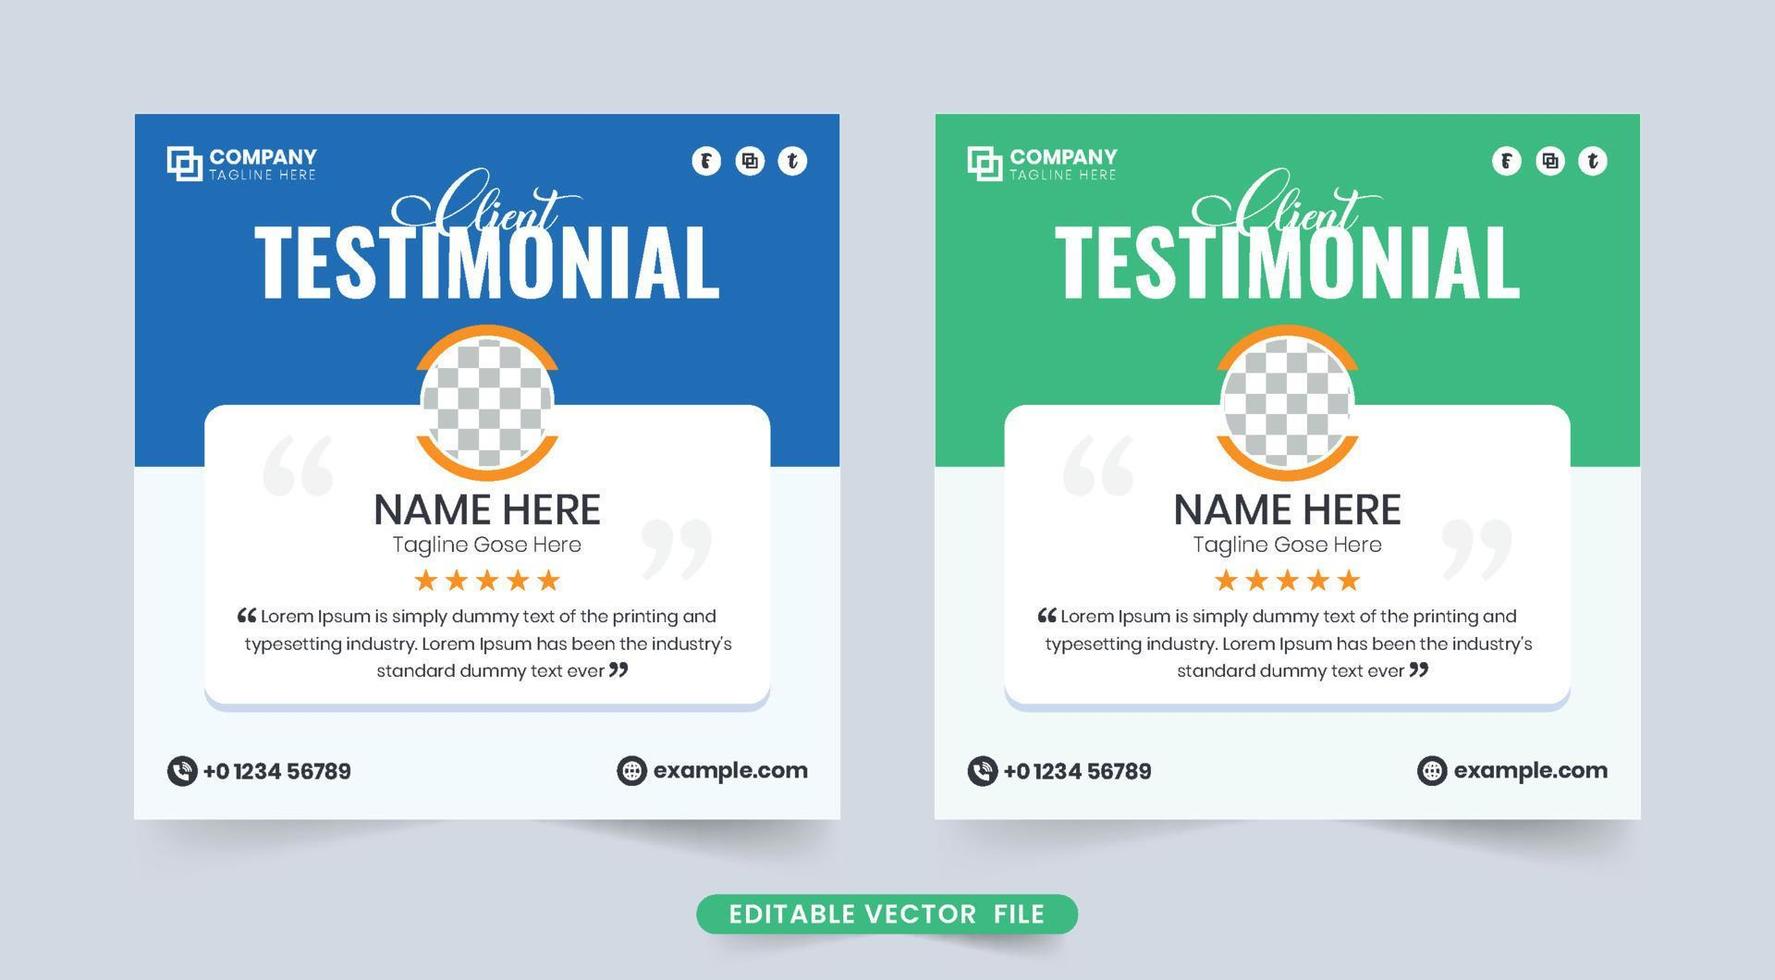 Customer review section design with a photo placeholder and stars. Creative client testimonial vector with blue and green colors. Customer service feedback and testimonial design for websites.